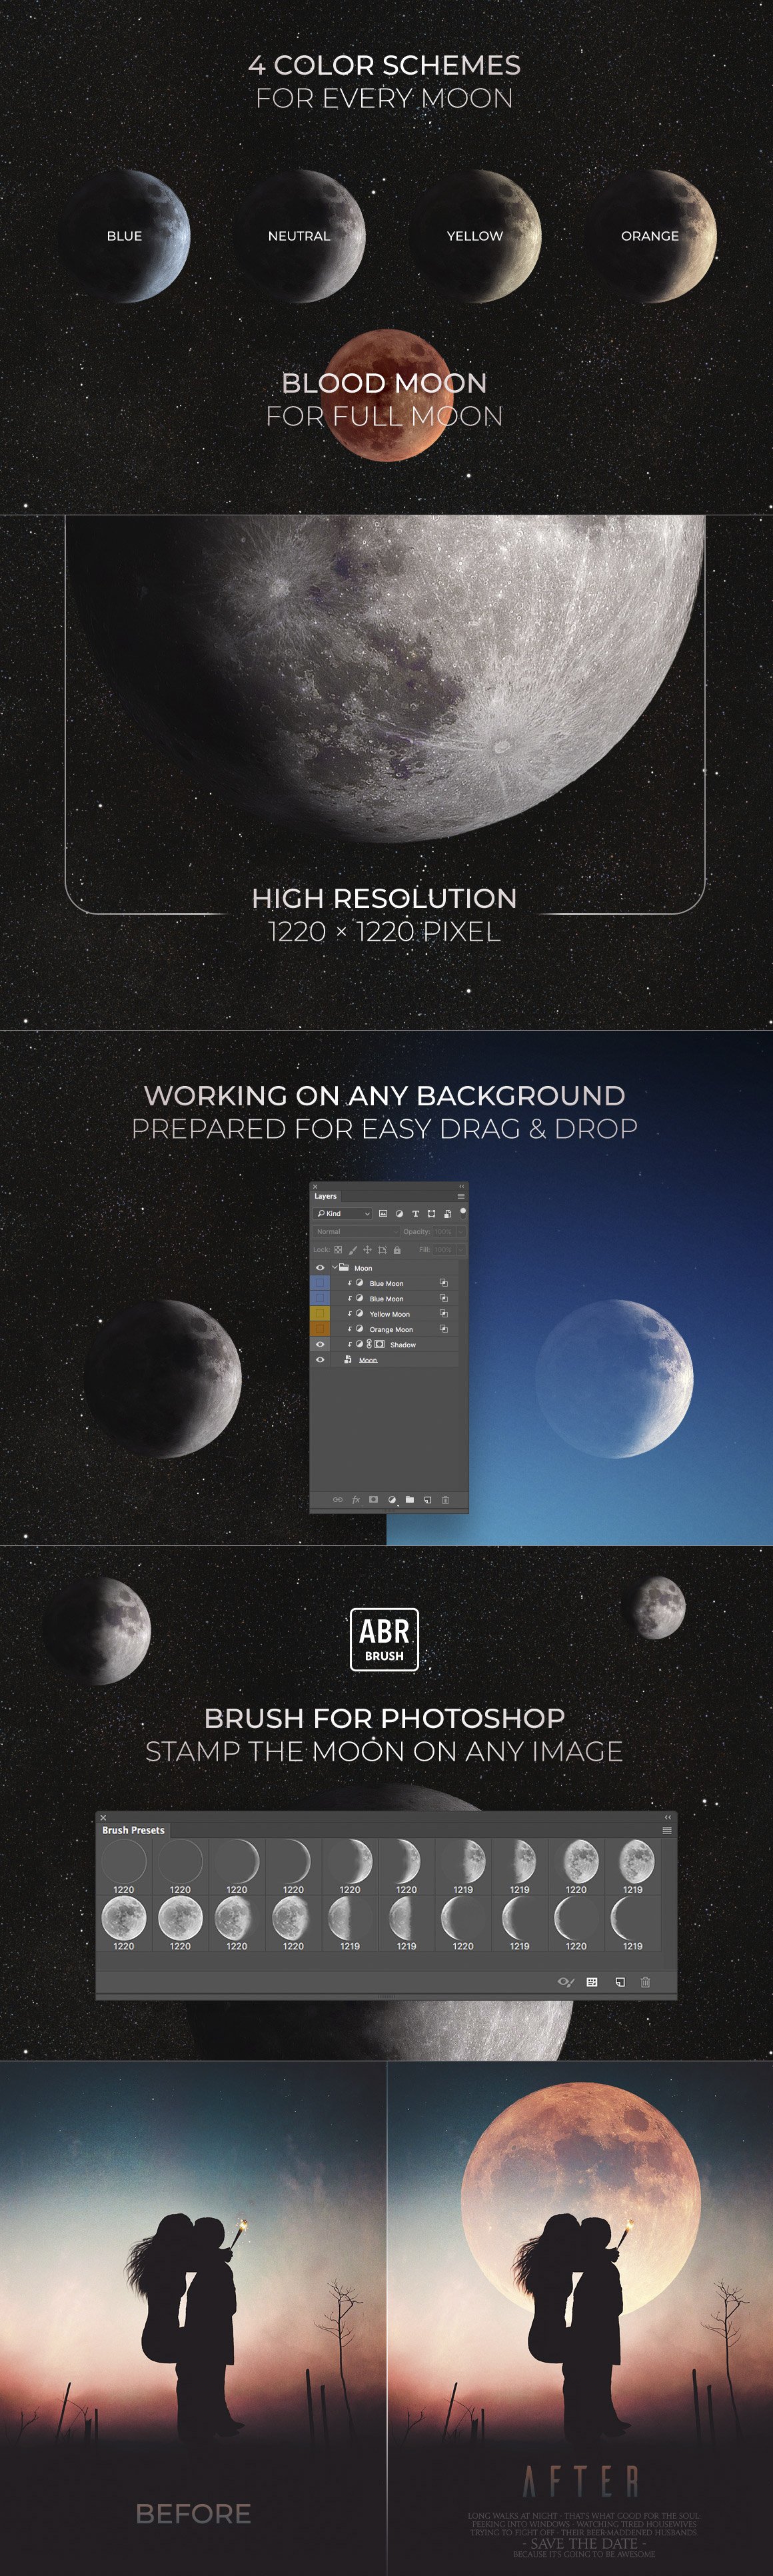 High-Res Moon Cycle for Image Editing